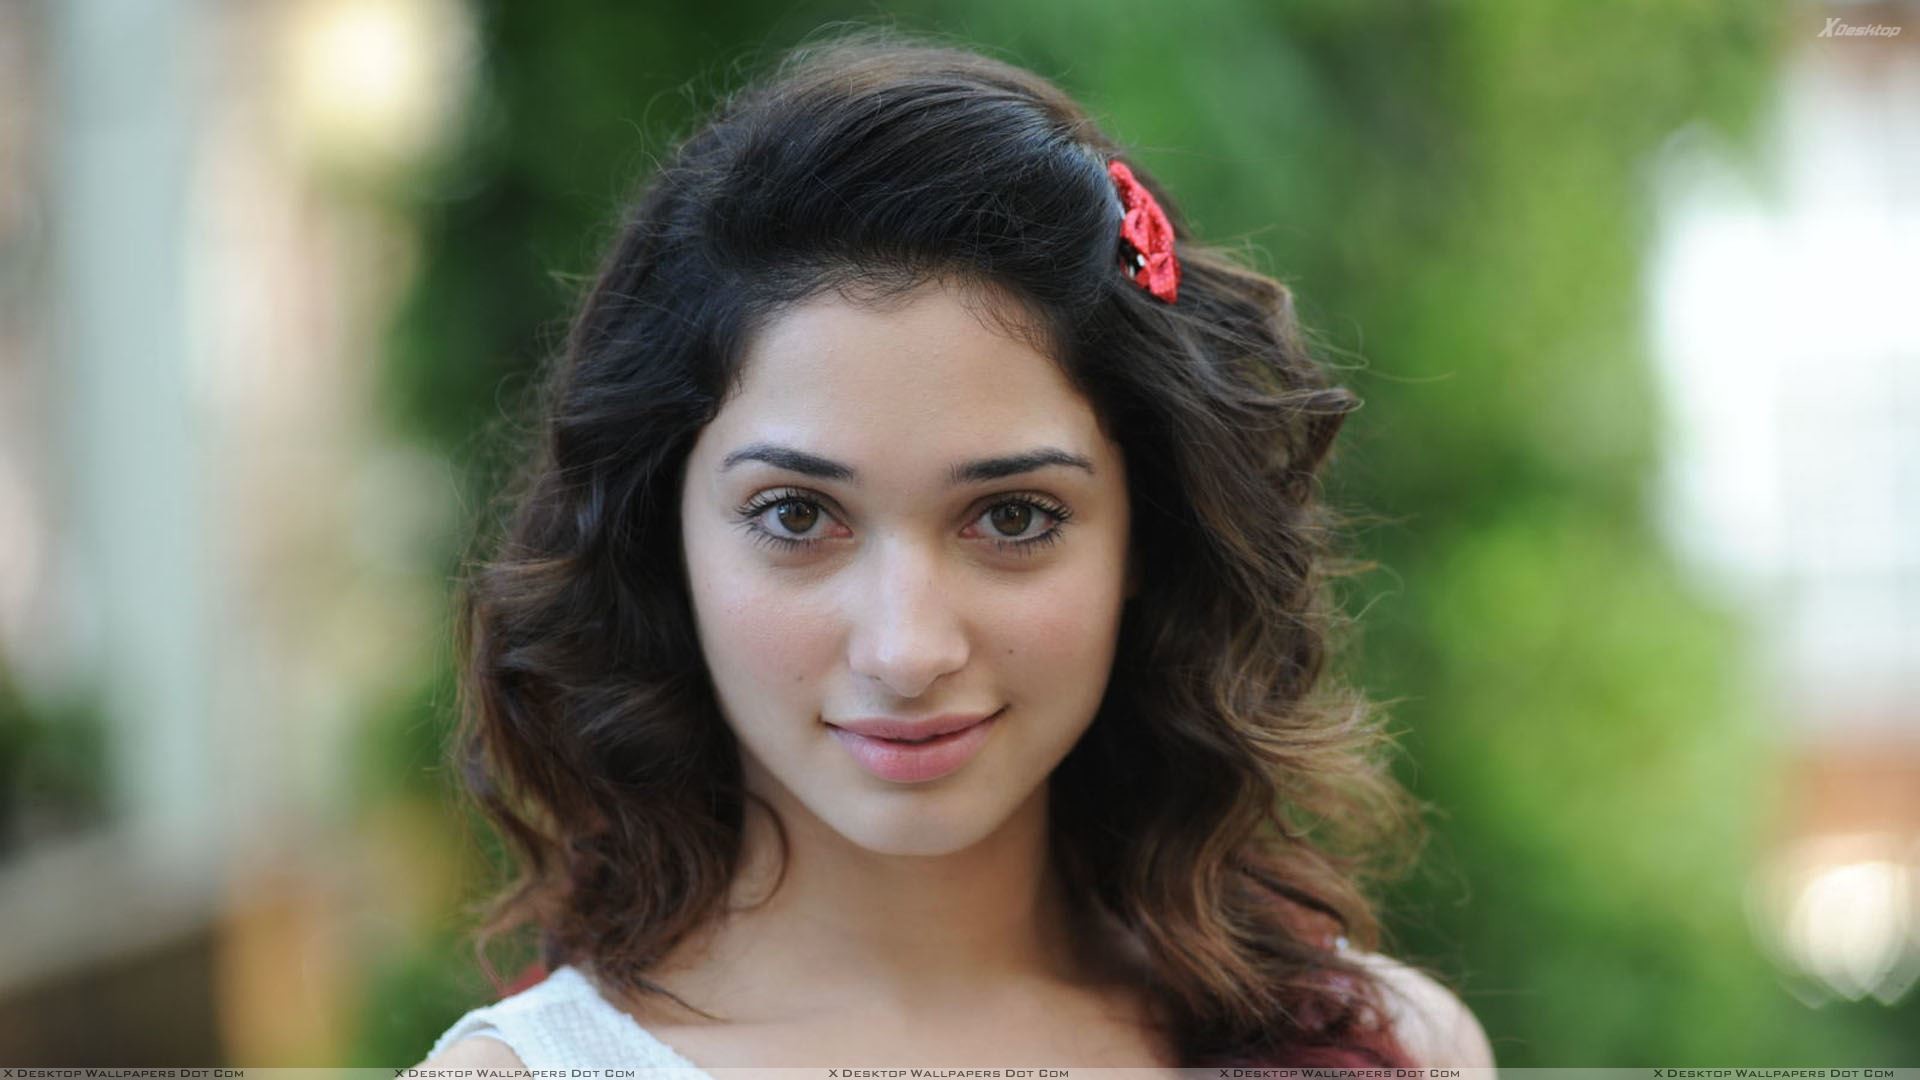 1920x1080 You are viewing wallpaper titled "Tamanna Bhatia ...